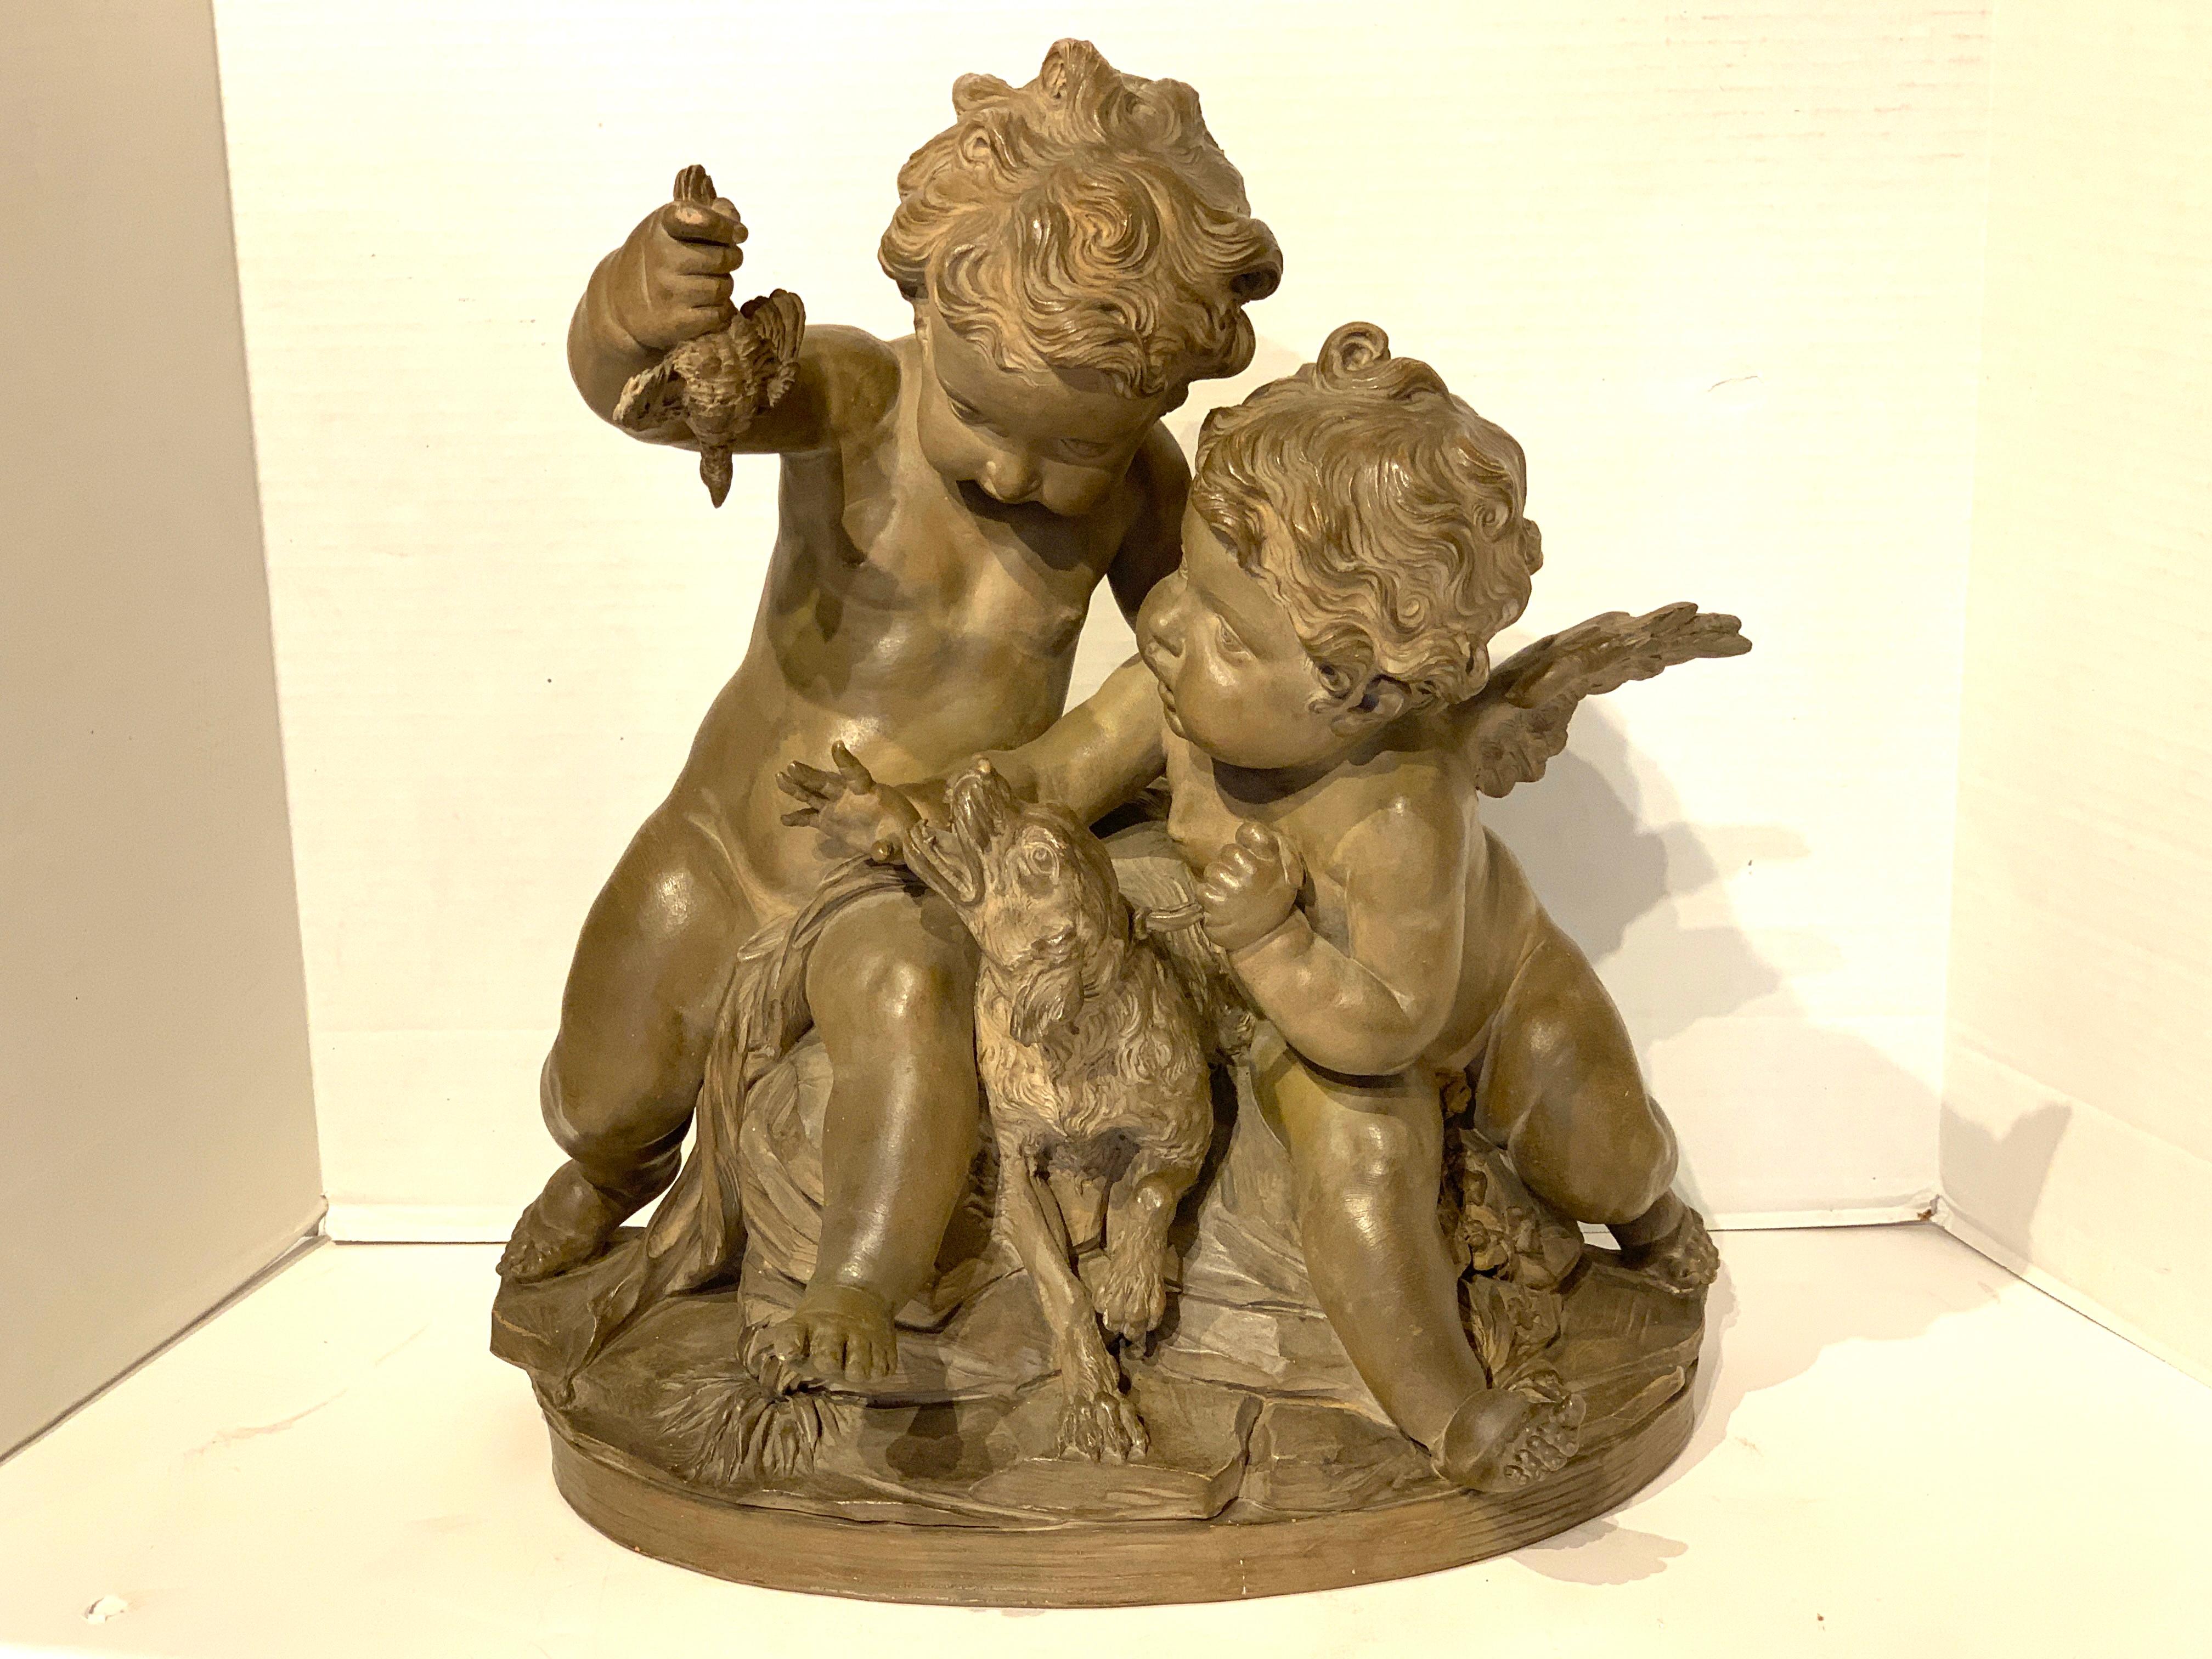 Exquisite 19th century French terracotta grouping in the style of Clodion, unusual subject of mortal (wingless) putto, holding a bird, tempting a dog, with winged Angel to the right. Beautifully detailed and modeled, warm original patina, unmarked.